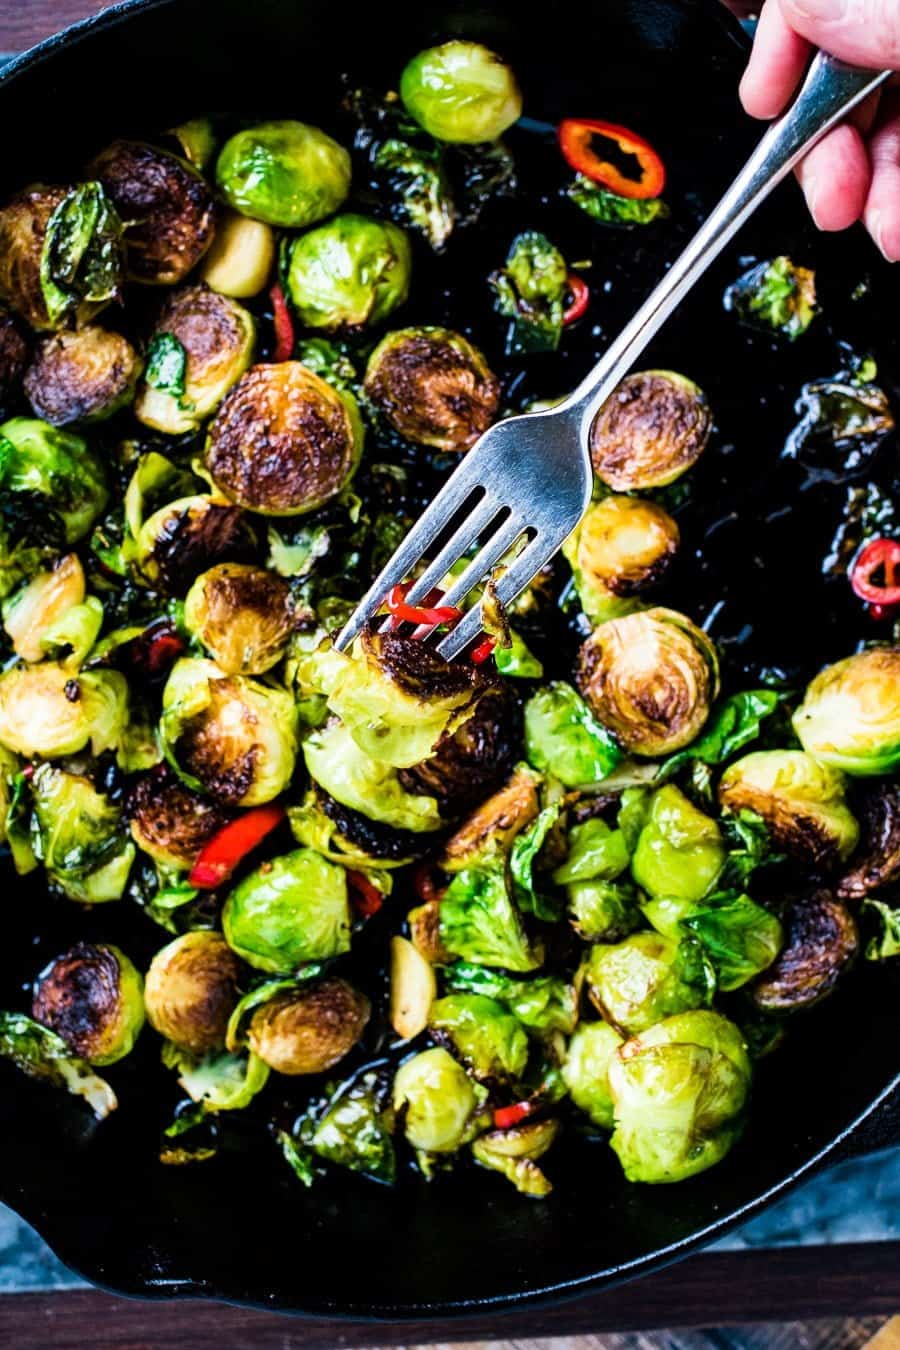 Overhead shot of a skillet of pan-seared brussels sprouts with red chiles. There is a fork picking up a sprout.